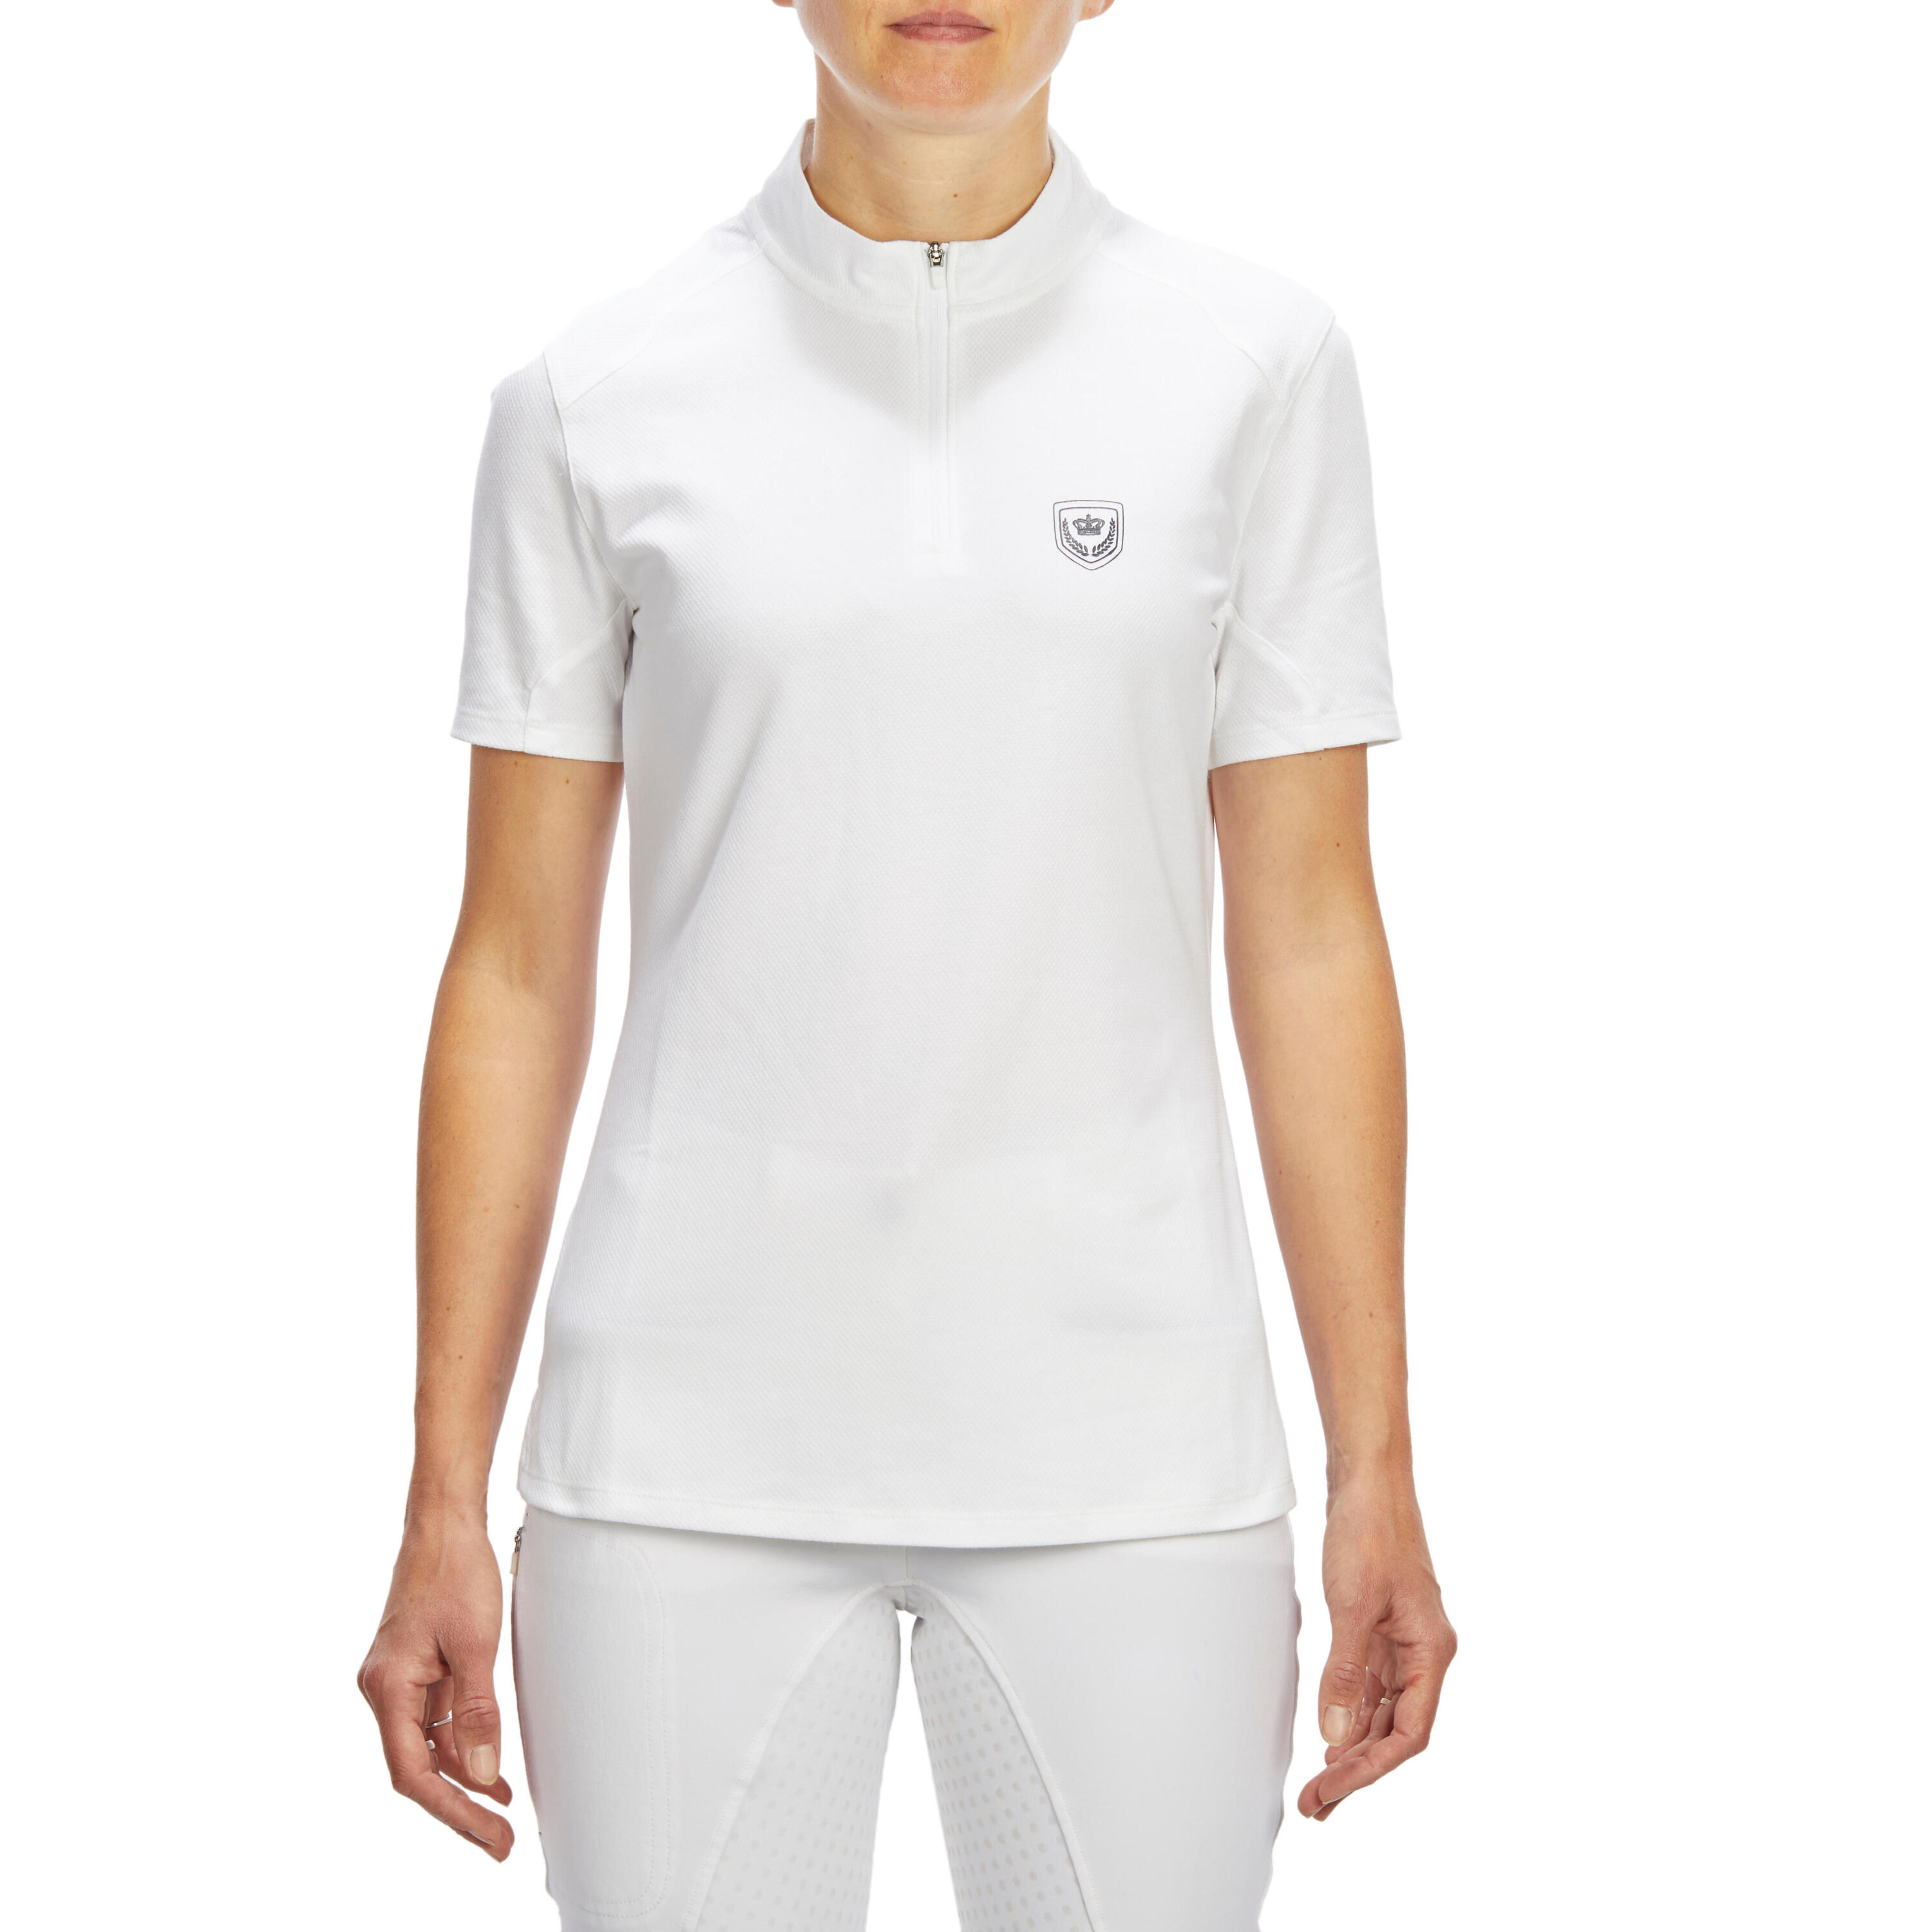 500 Women's Short-Sleeved Horse Riding Competition Polo Shirt - White 2/11